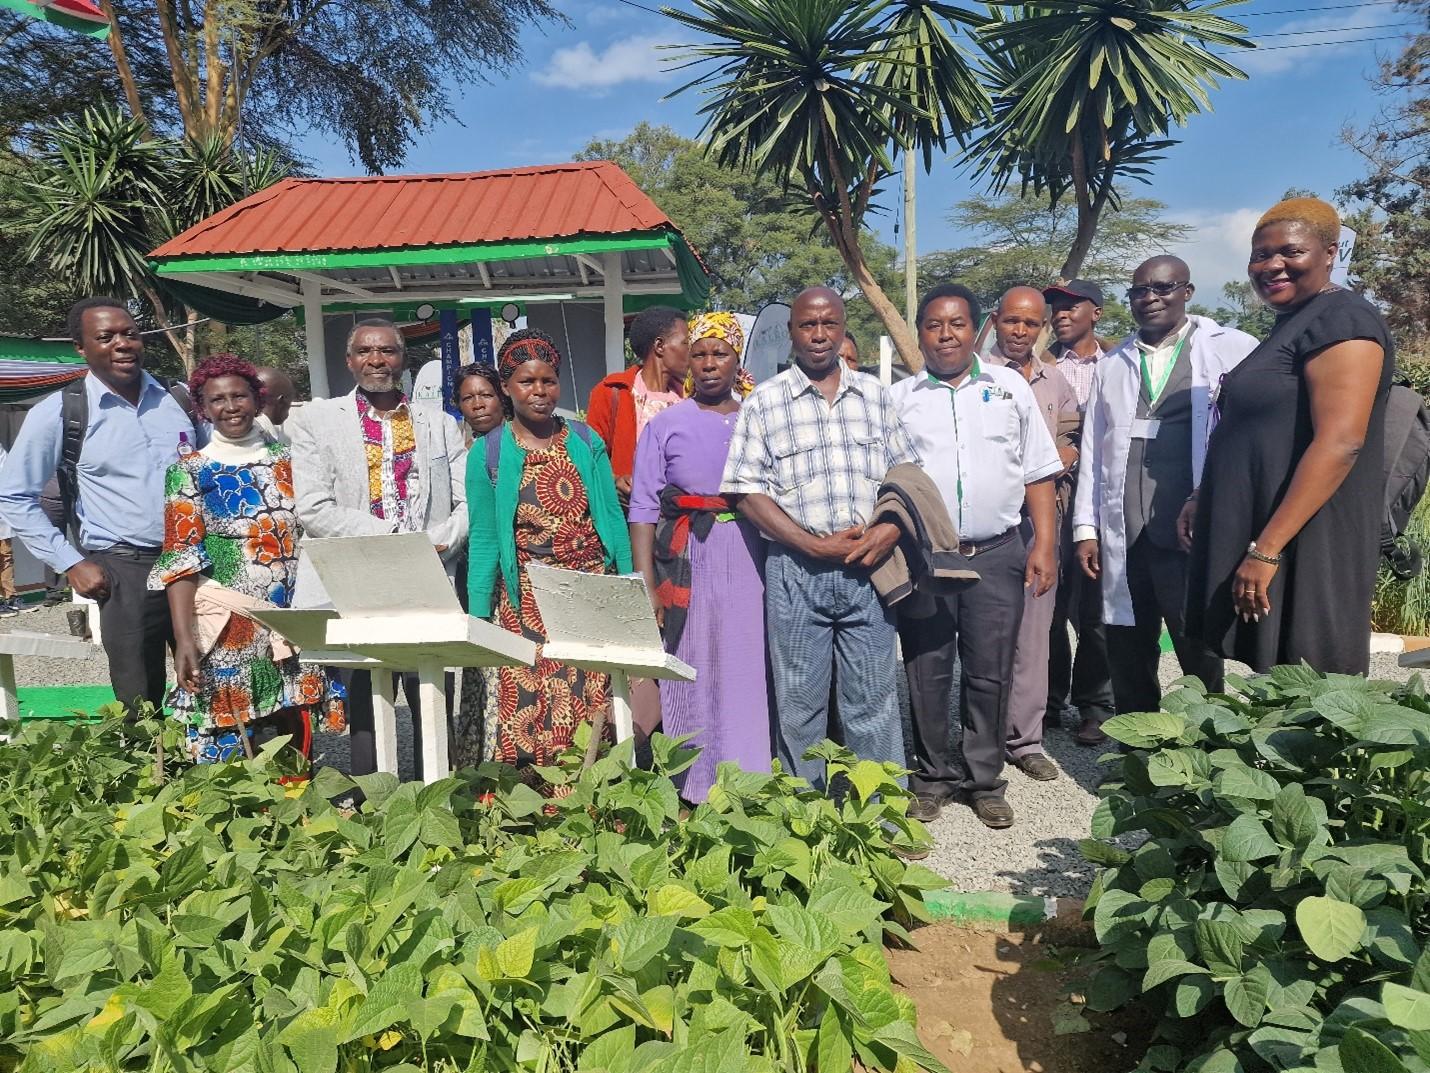 Bundling Social Technical Innovations for a Diversification, Inclusive and Resilient Agri-Food System in Kenya - Alliance Bioversity International - CIAT